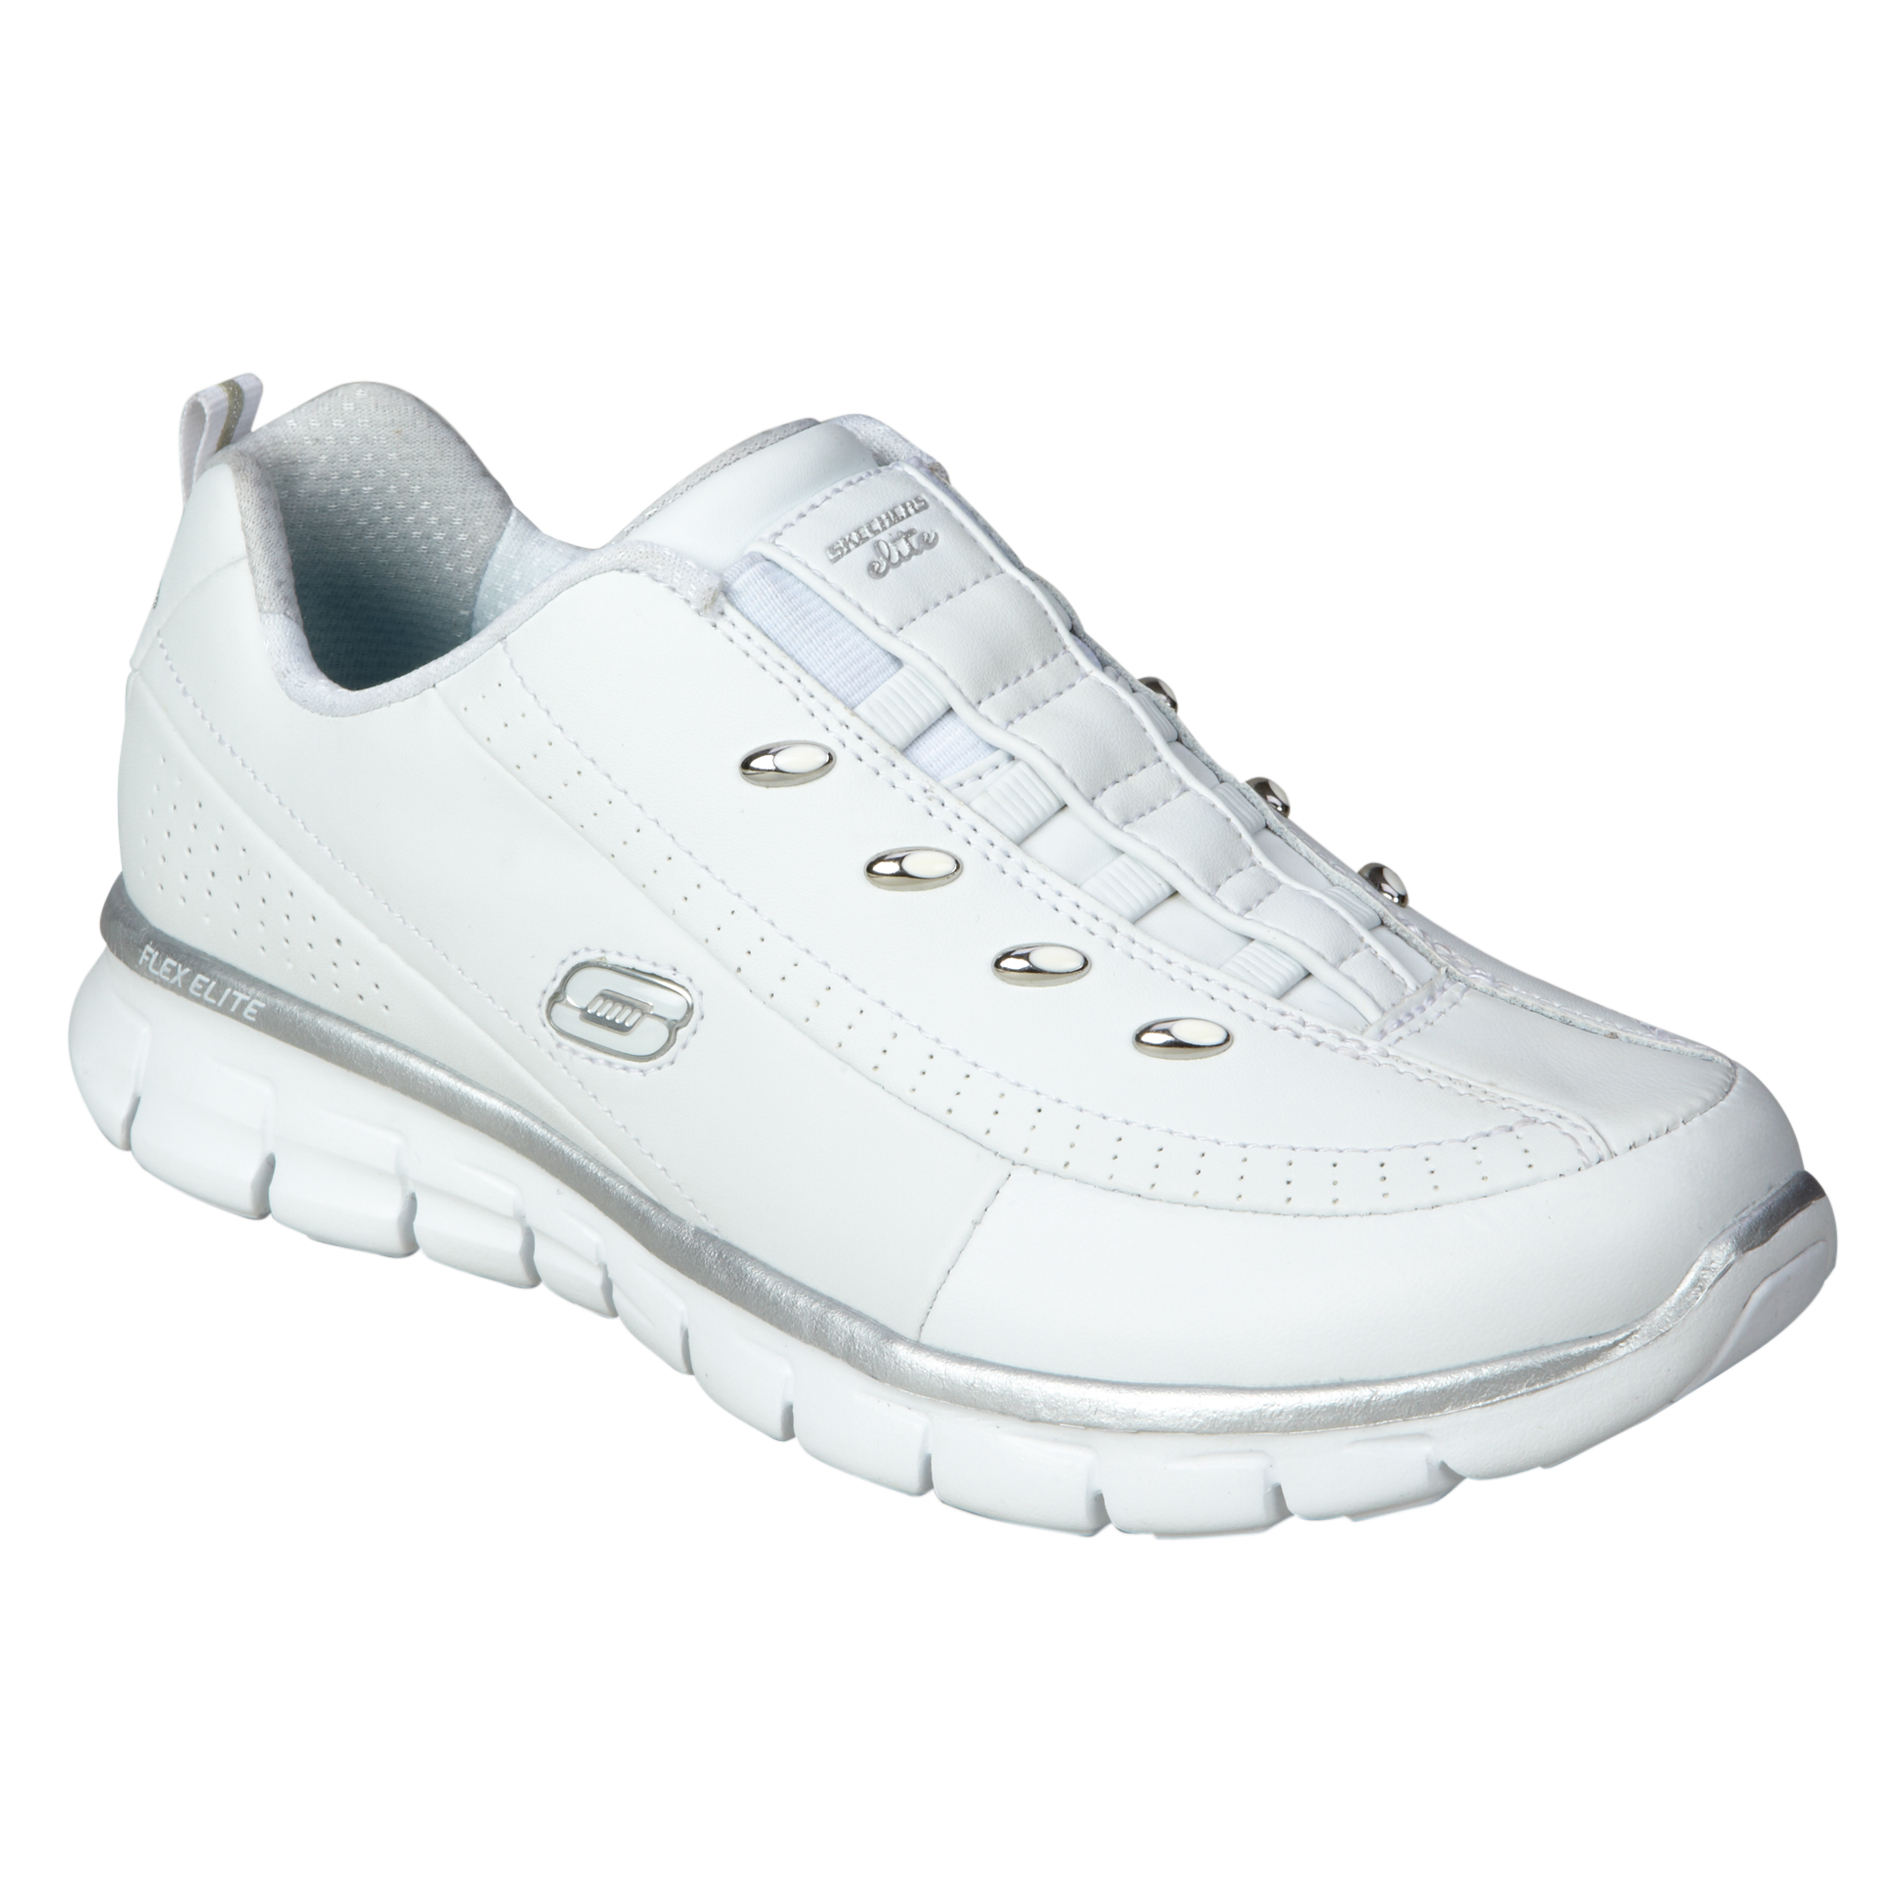 Women's White Athletic Shoe: Classic Style and Comfort at Sears